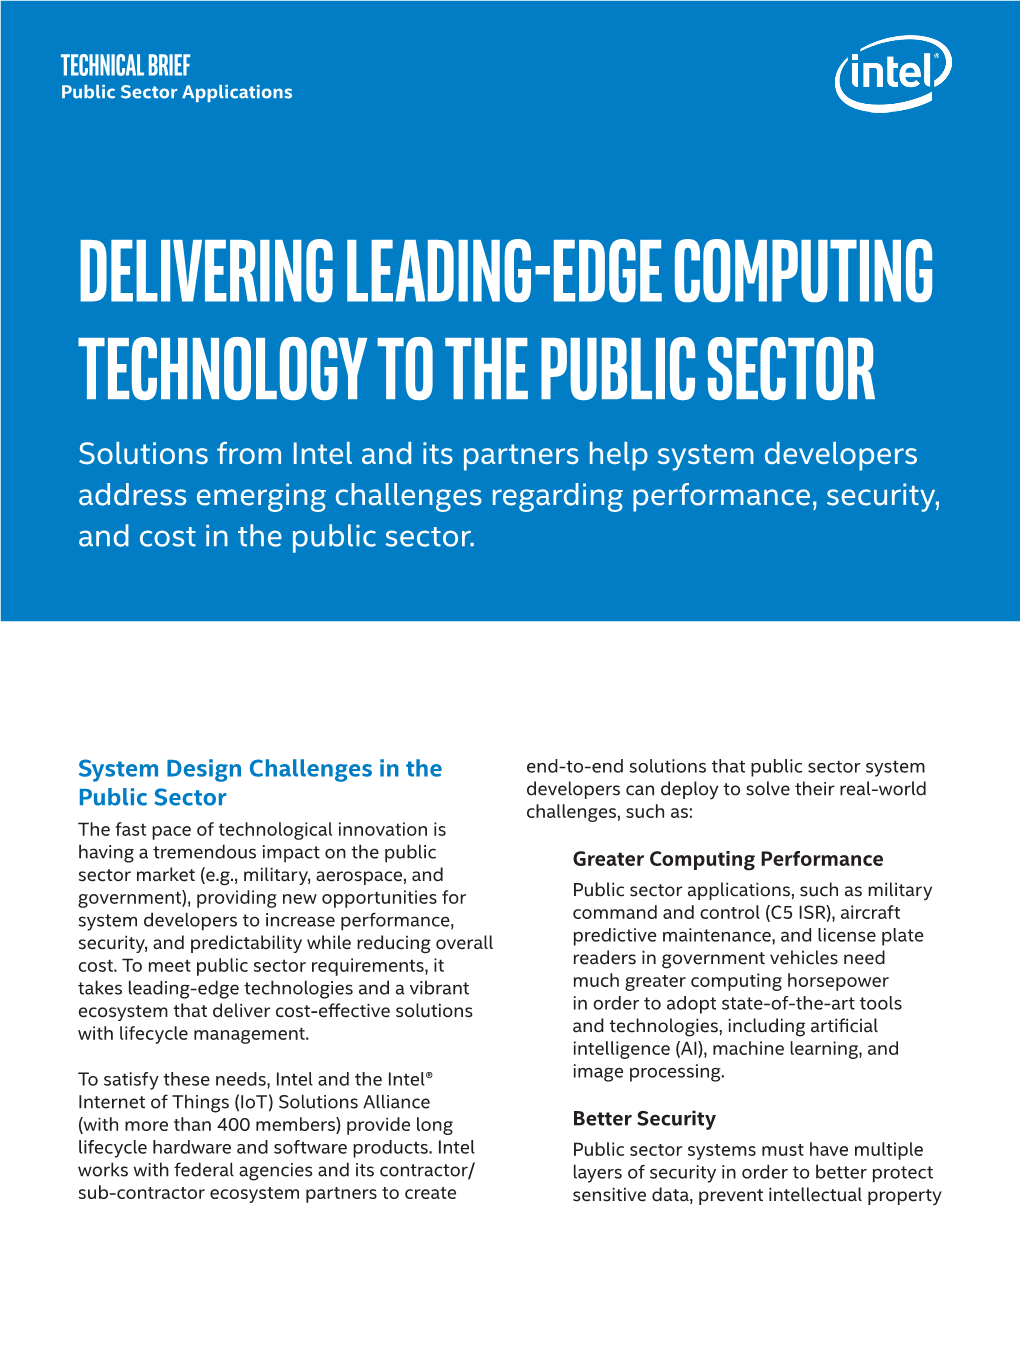 Delivering Leading-Edge Computing Technology to the Public Sector